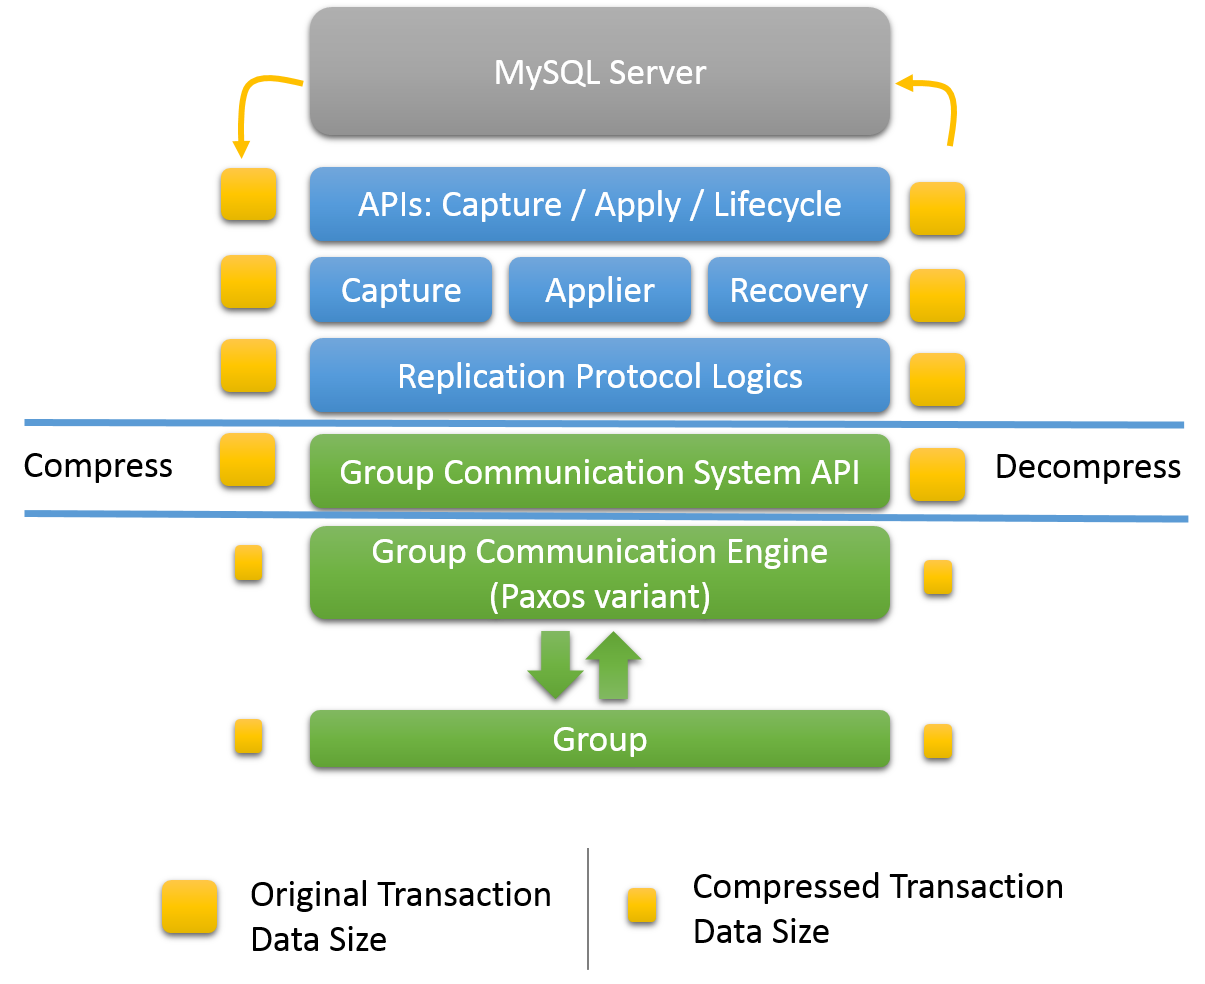 The MySQL Group Replication plugin architecture is shown as described in an earlier topic, with the five layers of the plugin positioned between the MySQL server and the replication group. Compression and decompression are handled by the Group Communication System API, which is the fourth layer of the Group Replication plugin. The group communication engine (the fifth layer of the plugin) and the group members use the compressed transactions with the smaller data size. The MySQL Server core and the three higher layers of the Group Replication plugin (the APIs, the capture, applier, and recovery components, and the replication protocol module) use the original transactions with the larger data size.